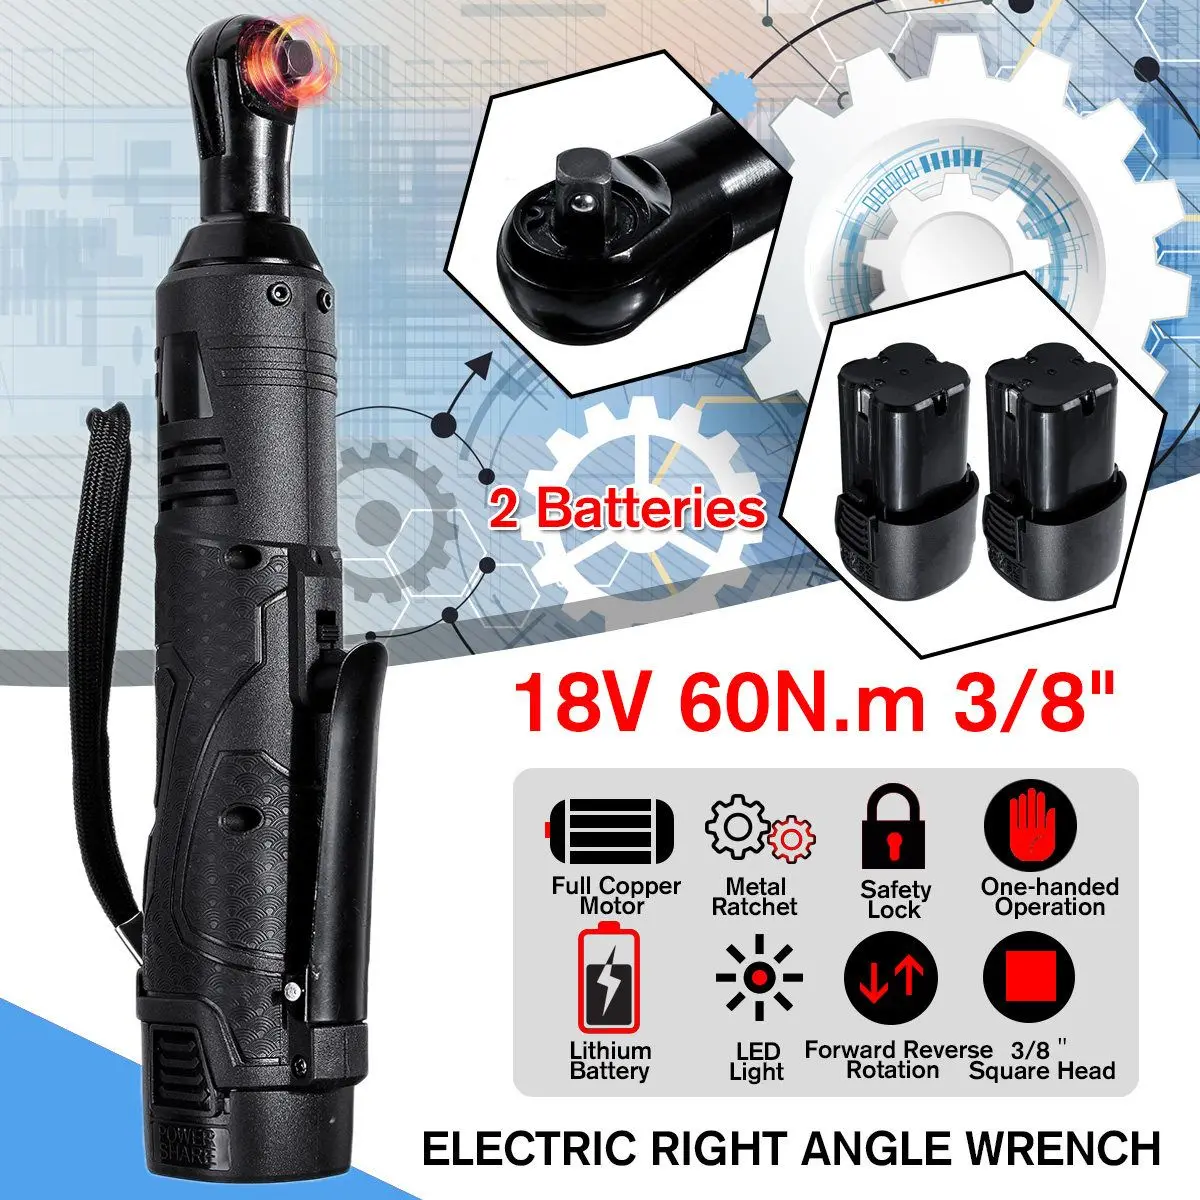 

18V Electric Wrench Kit 3/8 Cordless Ratchet Right Angle Rechargeable Scaffolding 60N.m Torque Ratchet with Battery LED Light